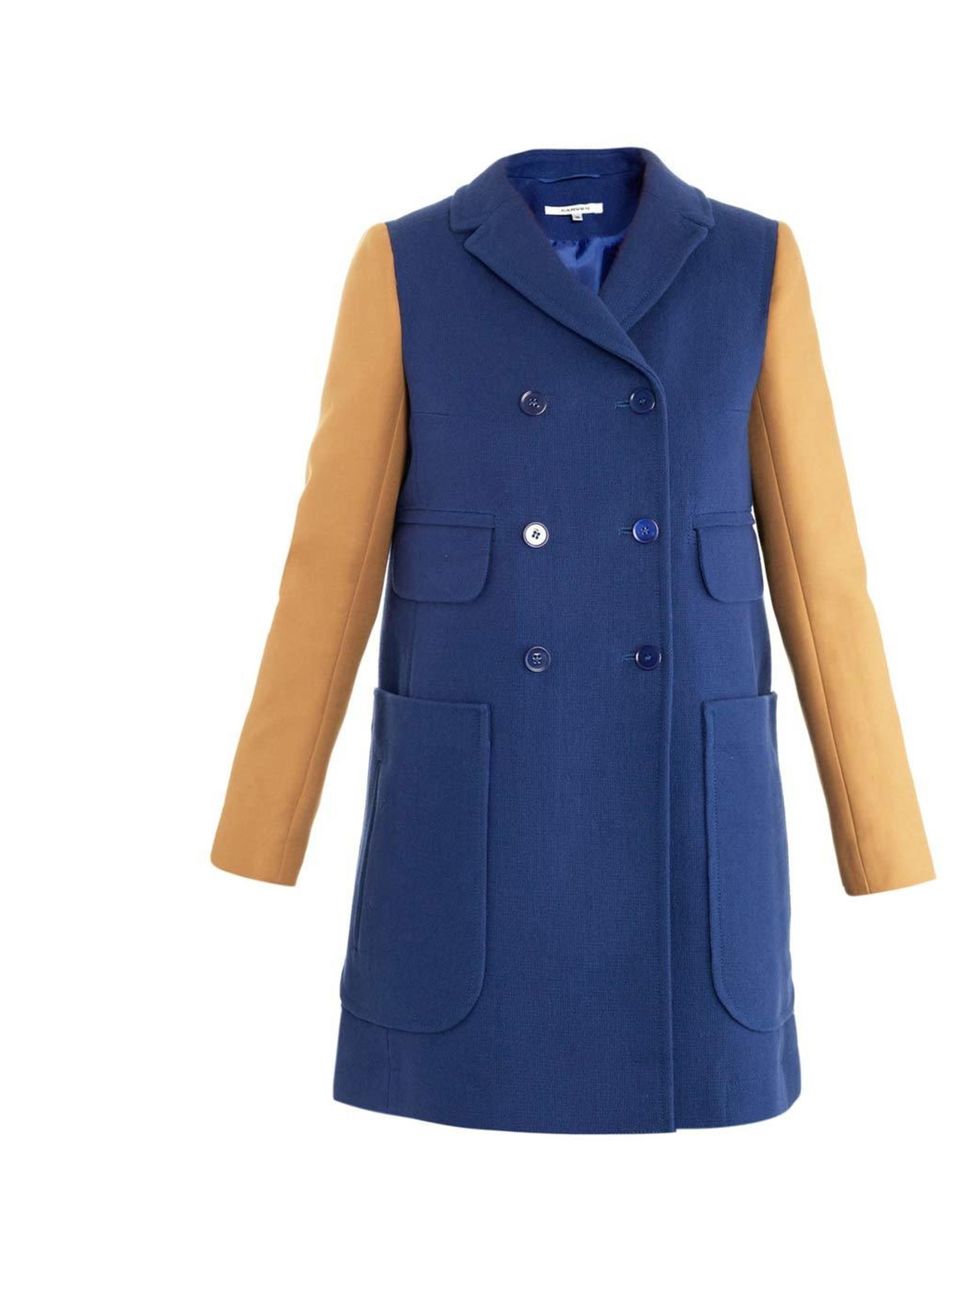 <p>Carven double breasted coat, £520 at <a href="http://www.matchesfashion.com/product/138269">Matches</a> </p>